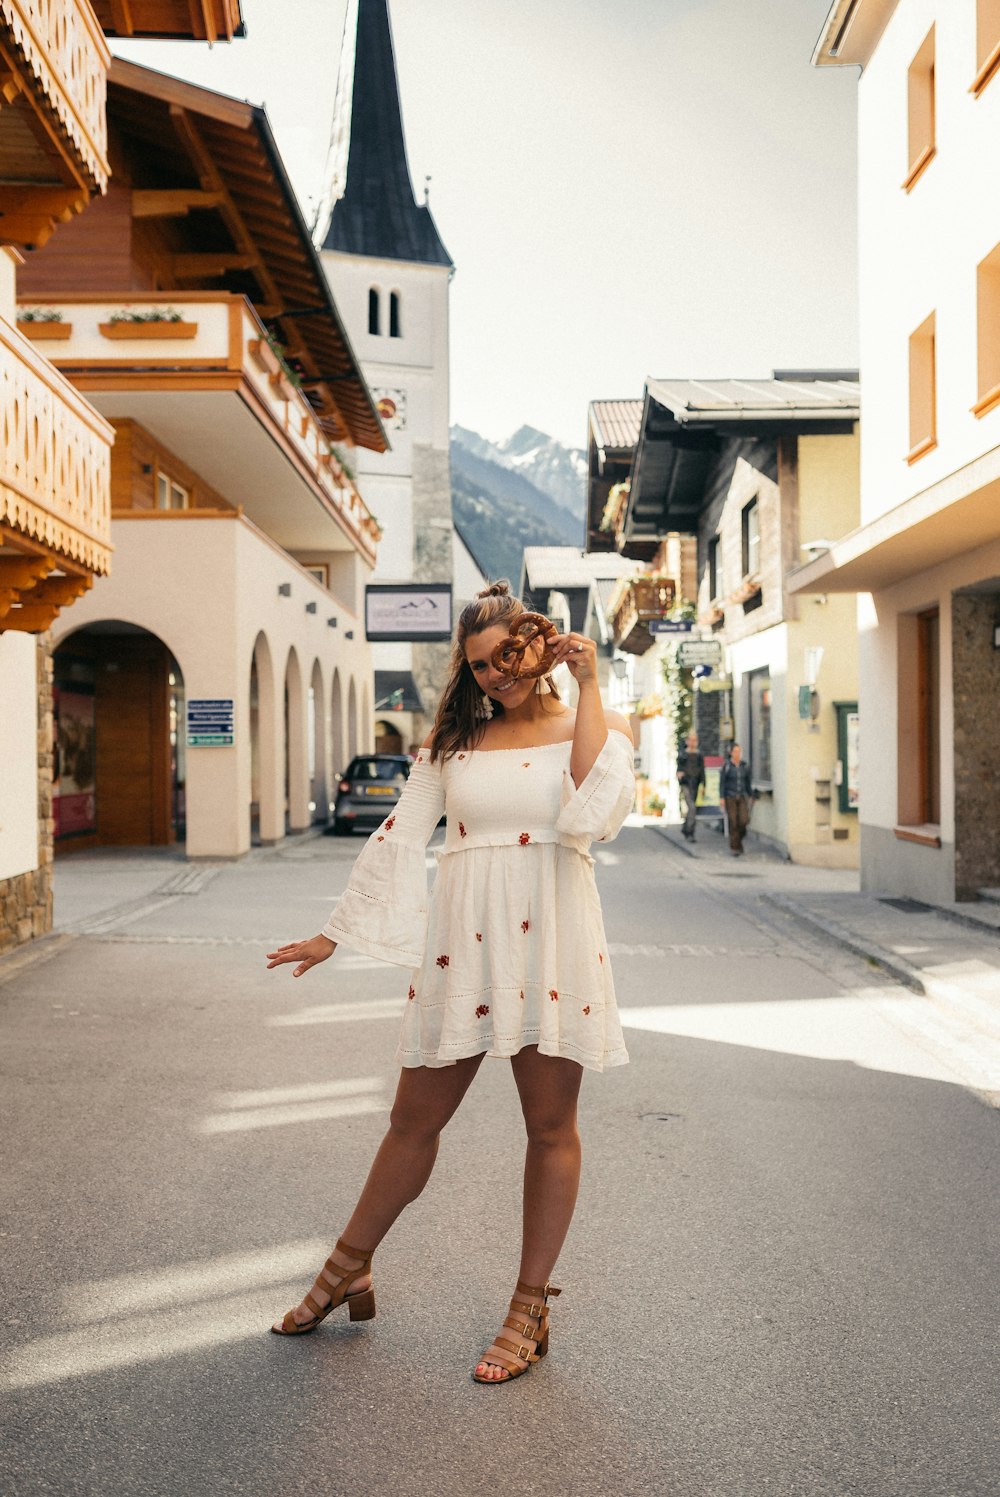 woman in white dress standing on the street during daytime